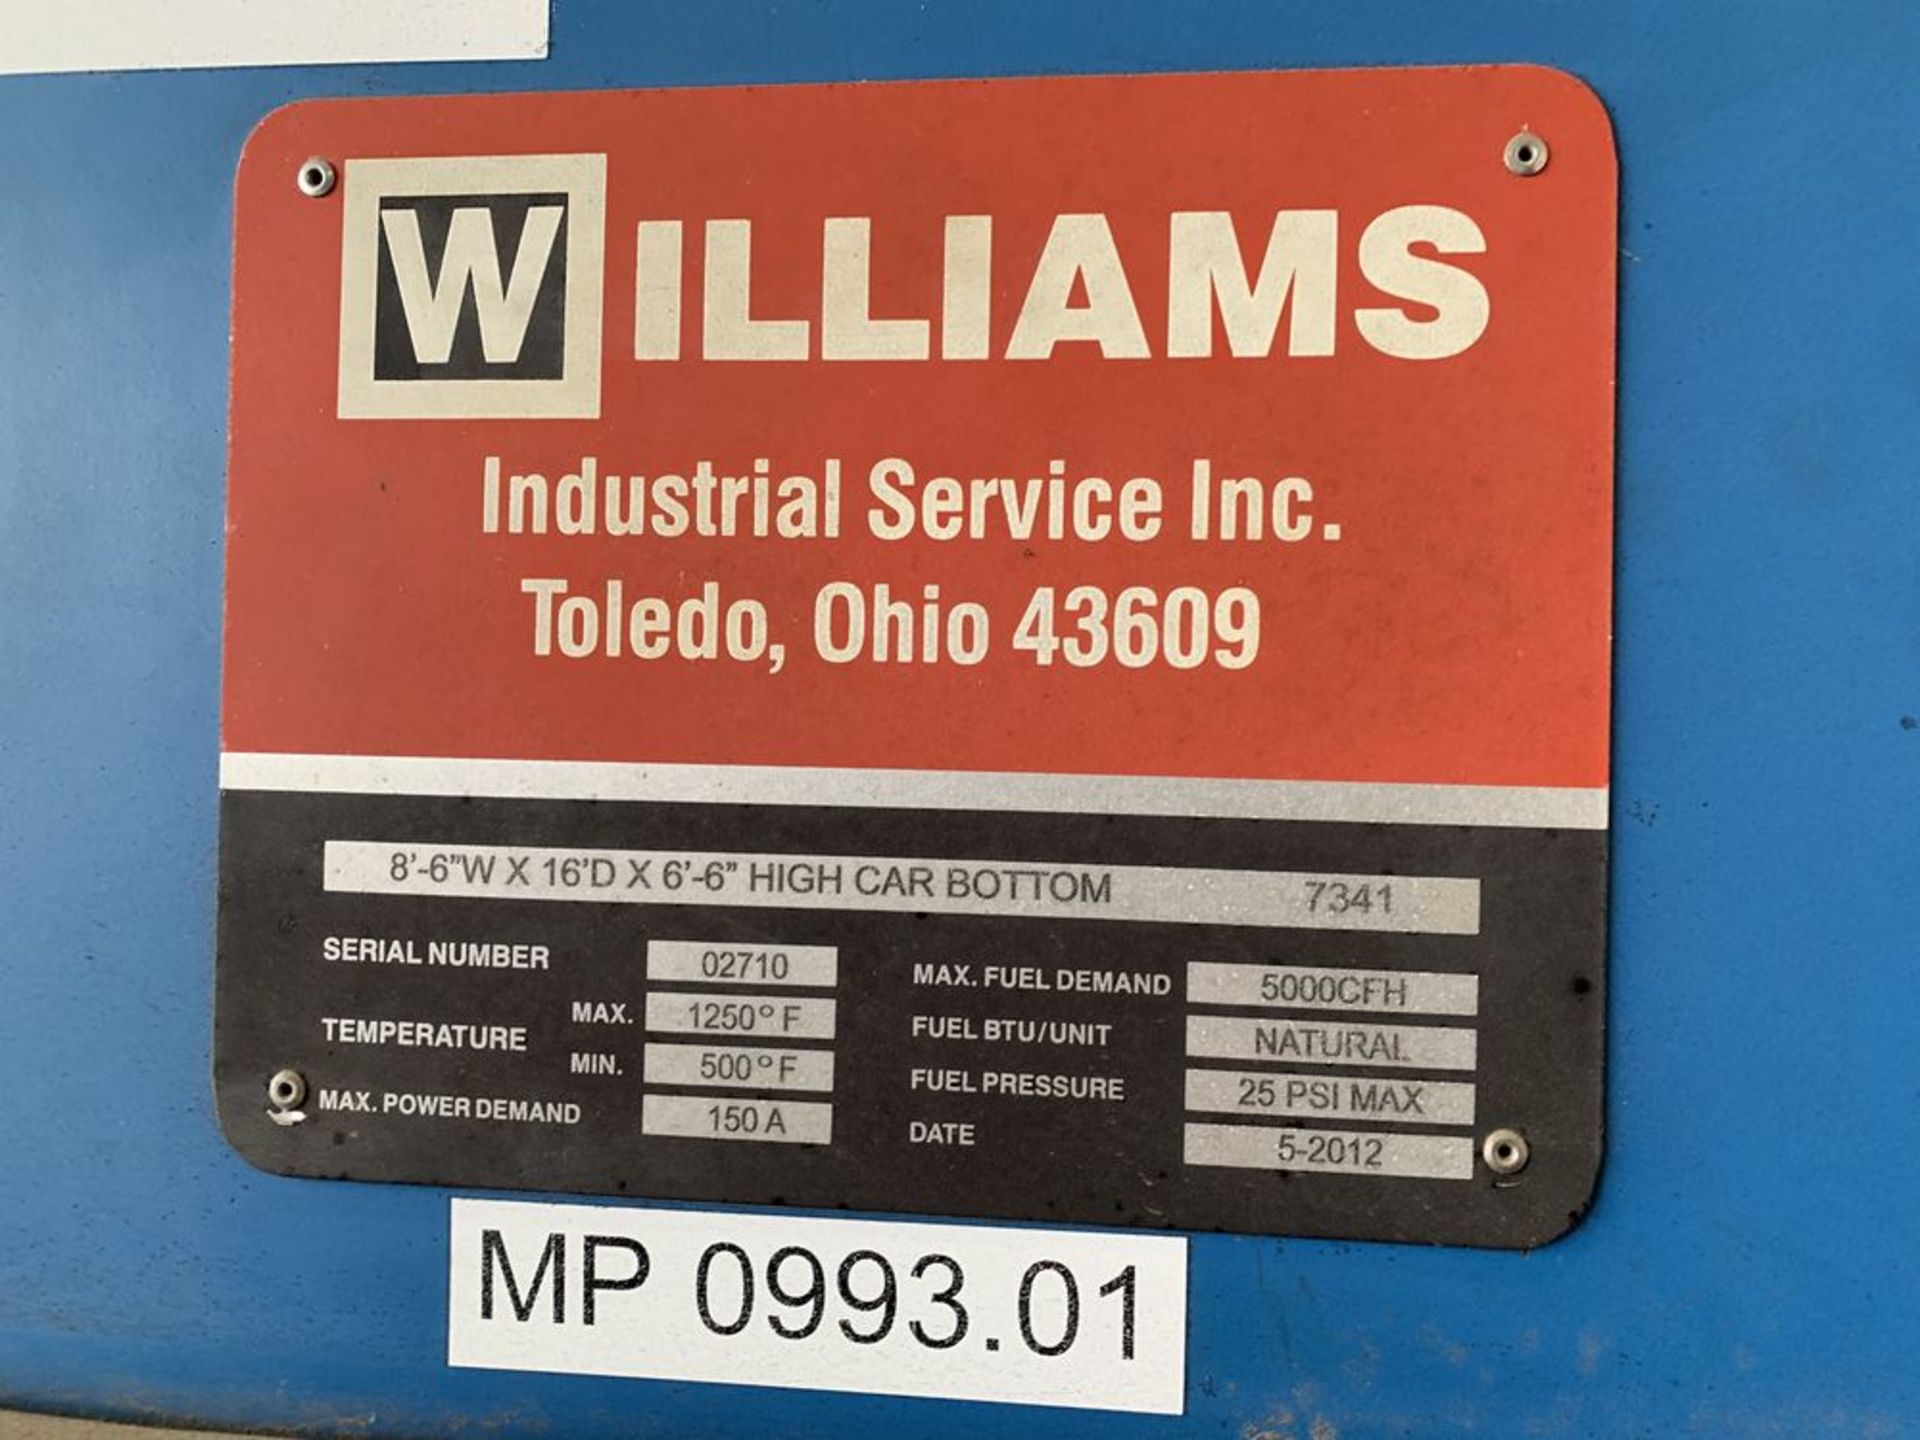 2012 WILLIAMS Car Bottom Stress Relief Furnace s/n 02710, 1250 Deg F Max Temp, Natural Gas, - Image 5 of 14